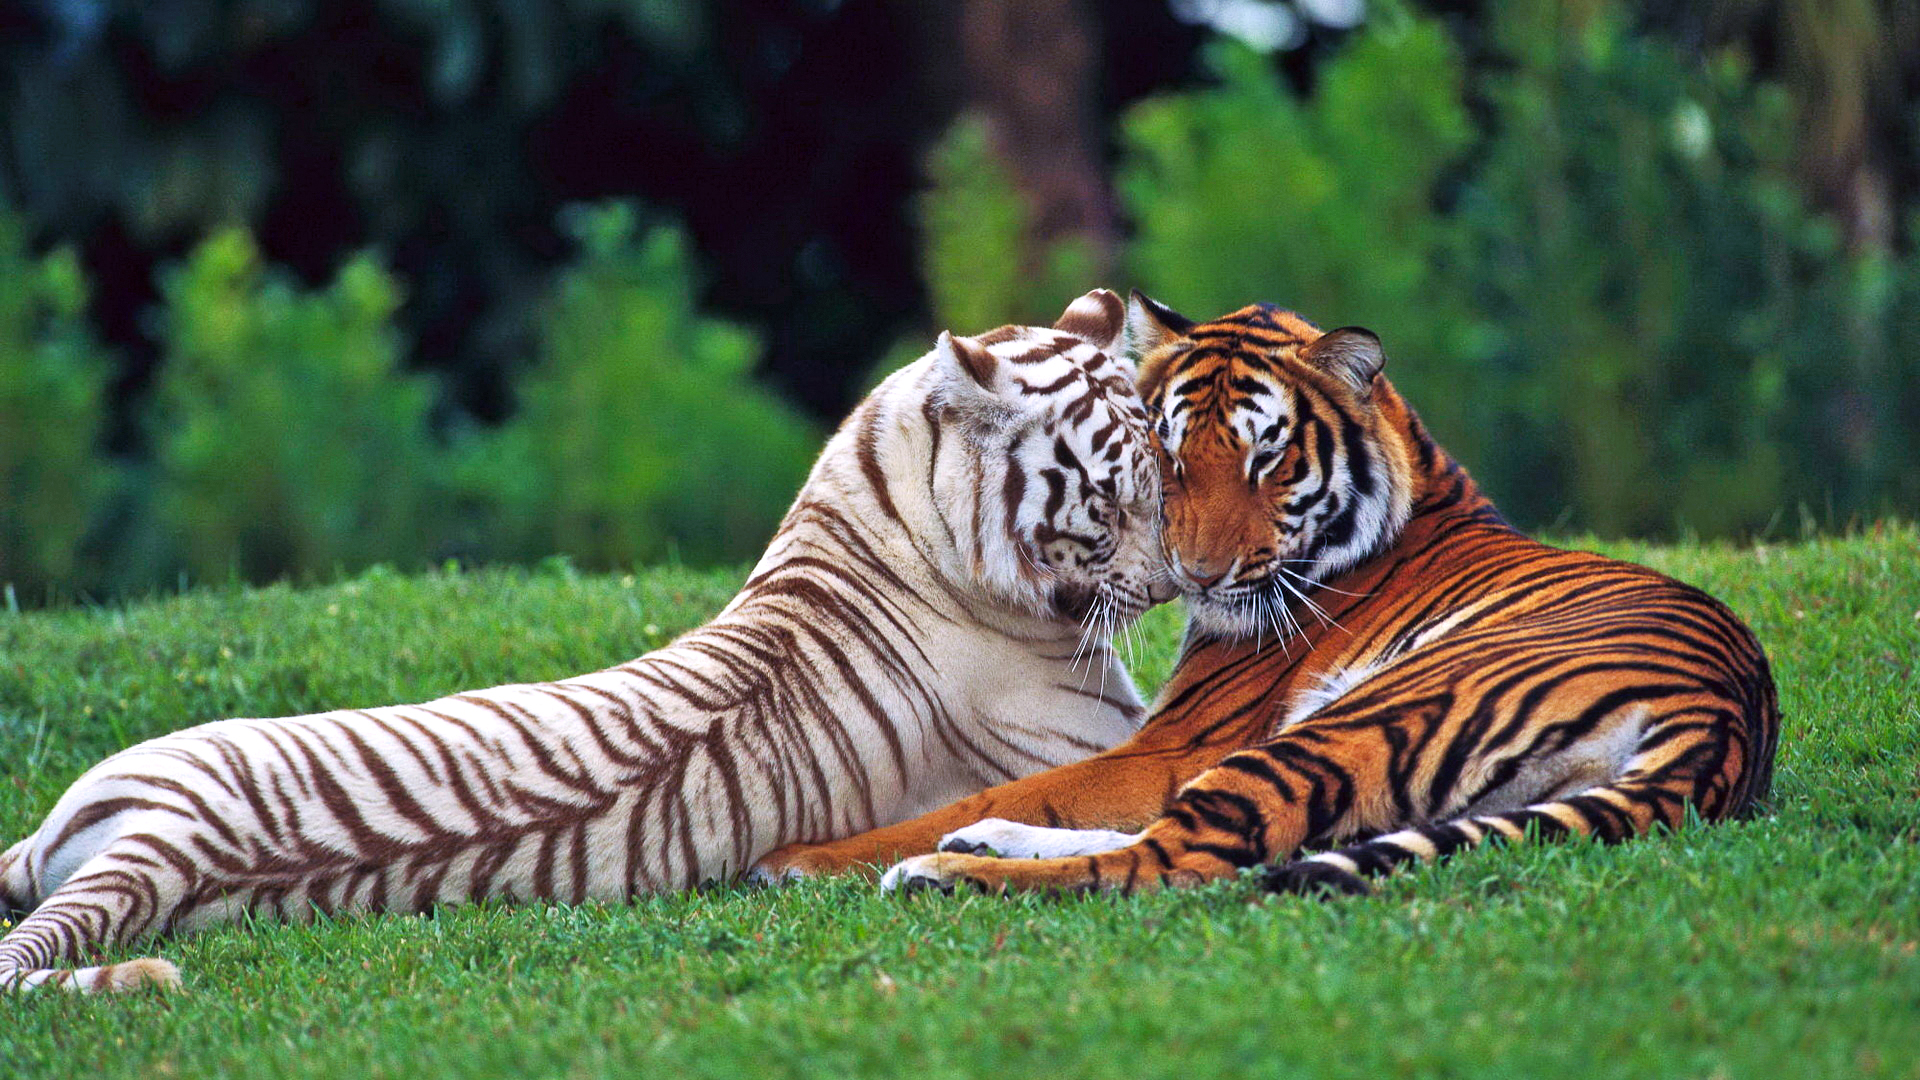 Wallpapers tigers grass forest on the desktop